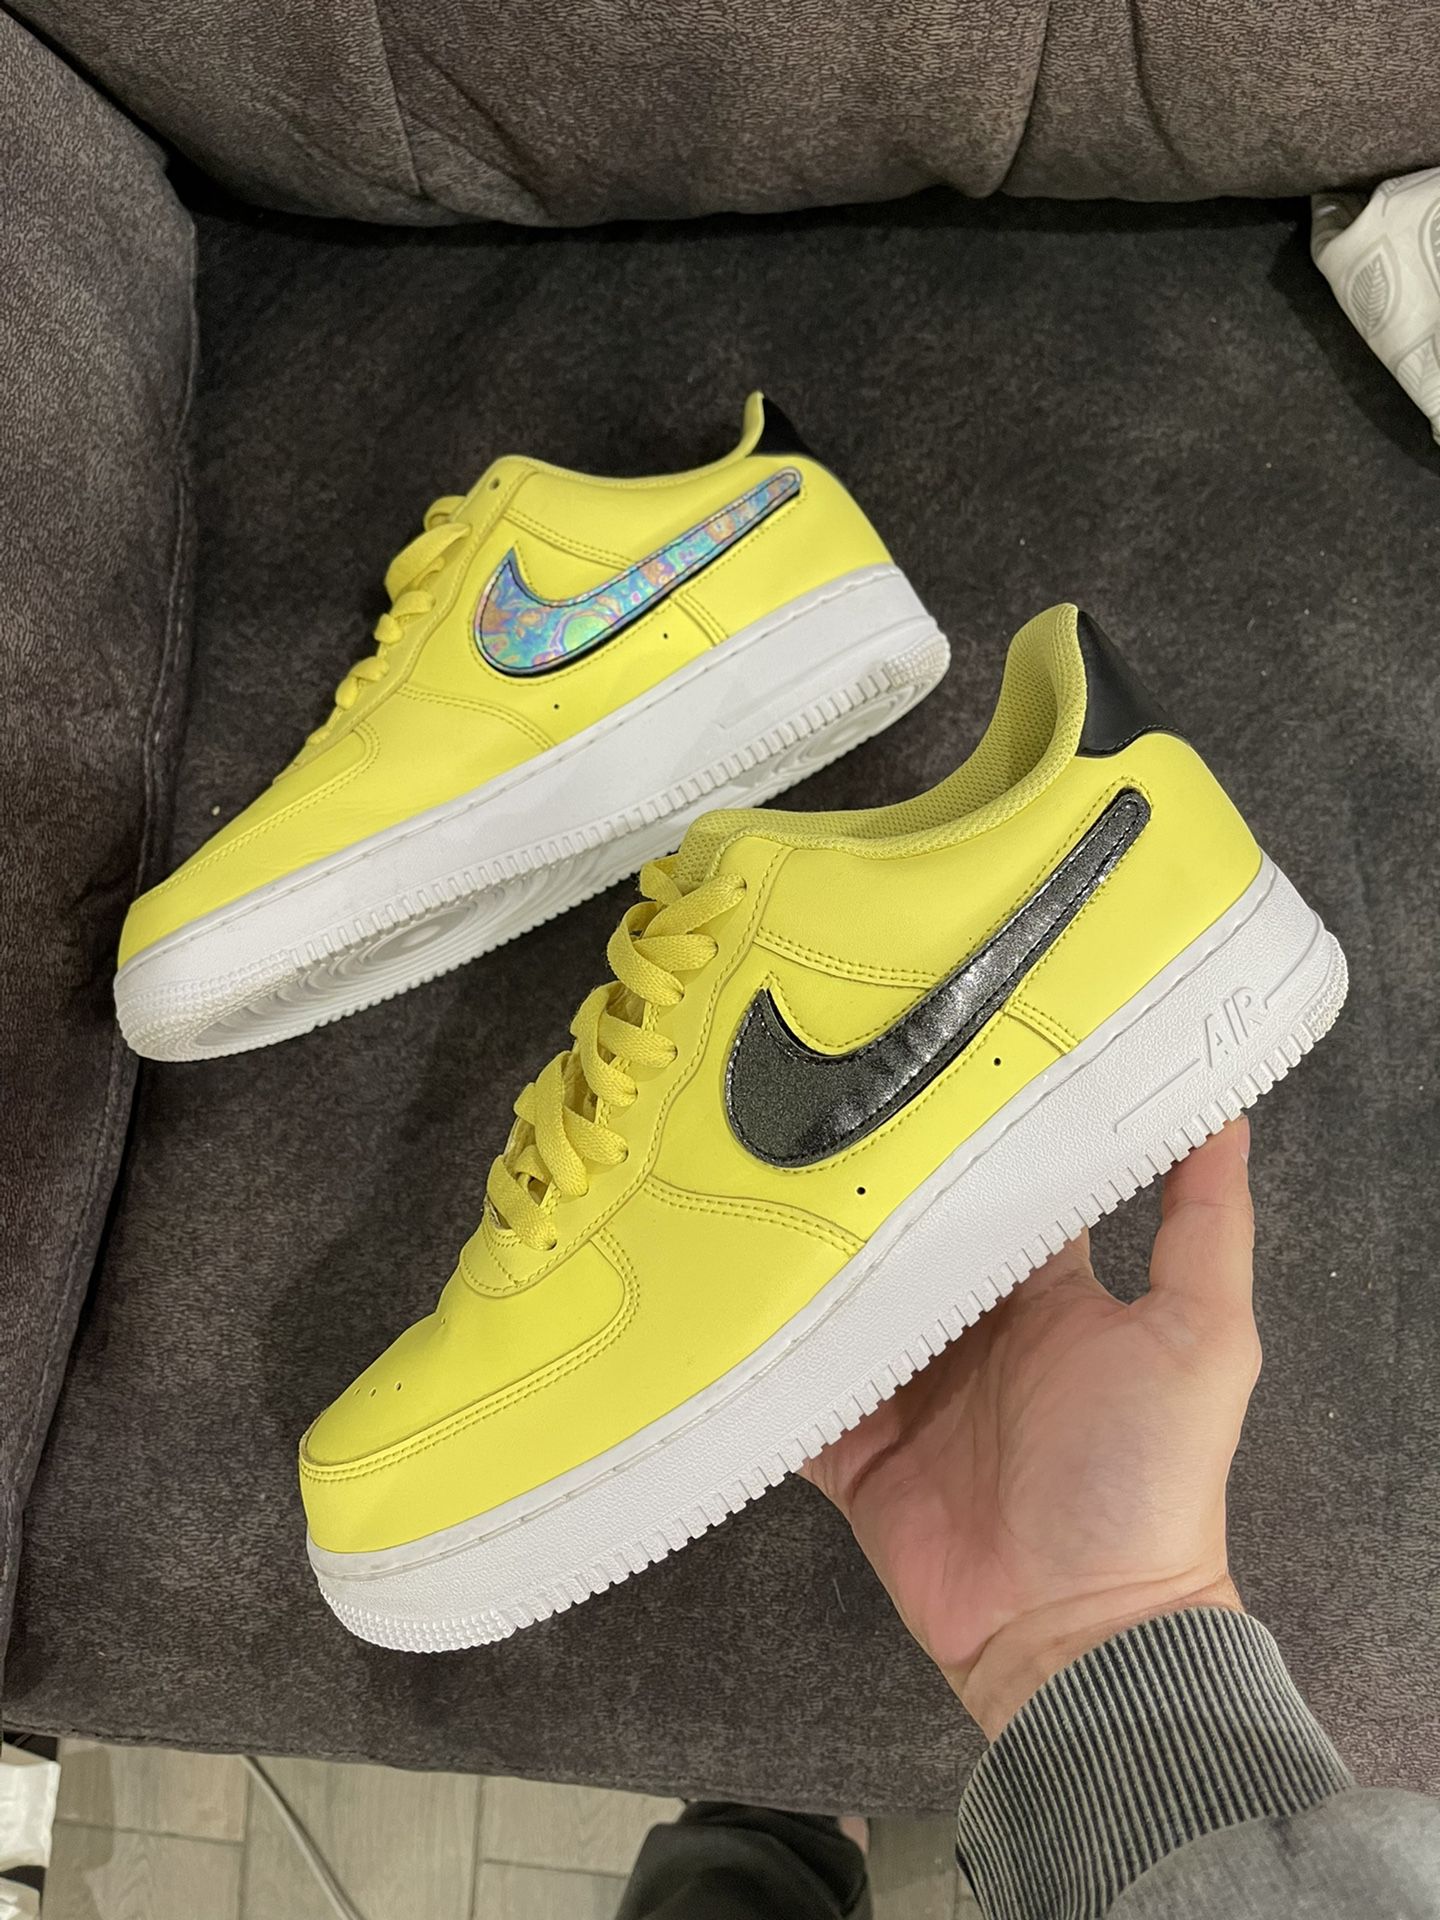 Nike Air Force 1 Yellow Pulse Size 11 for Sale in Los Angeles, CA